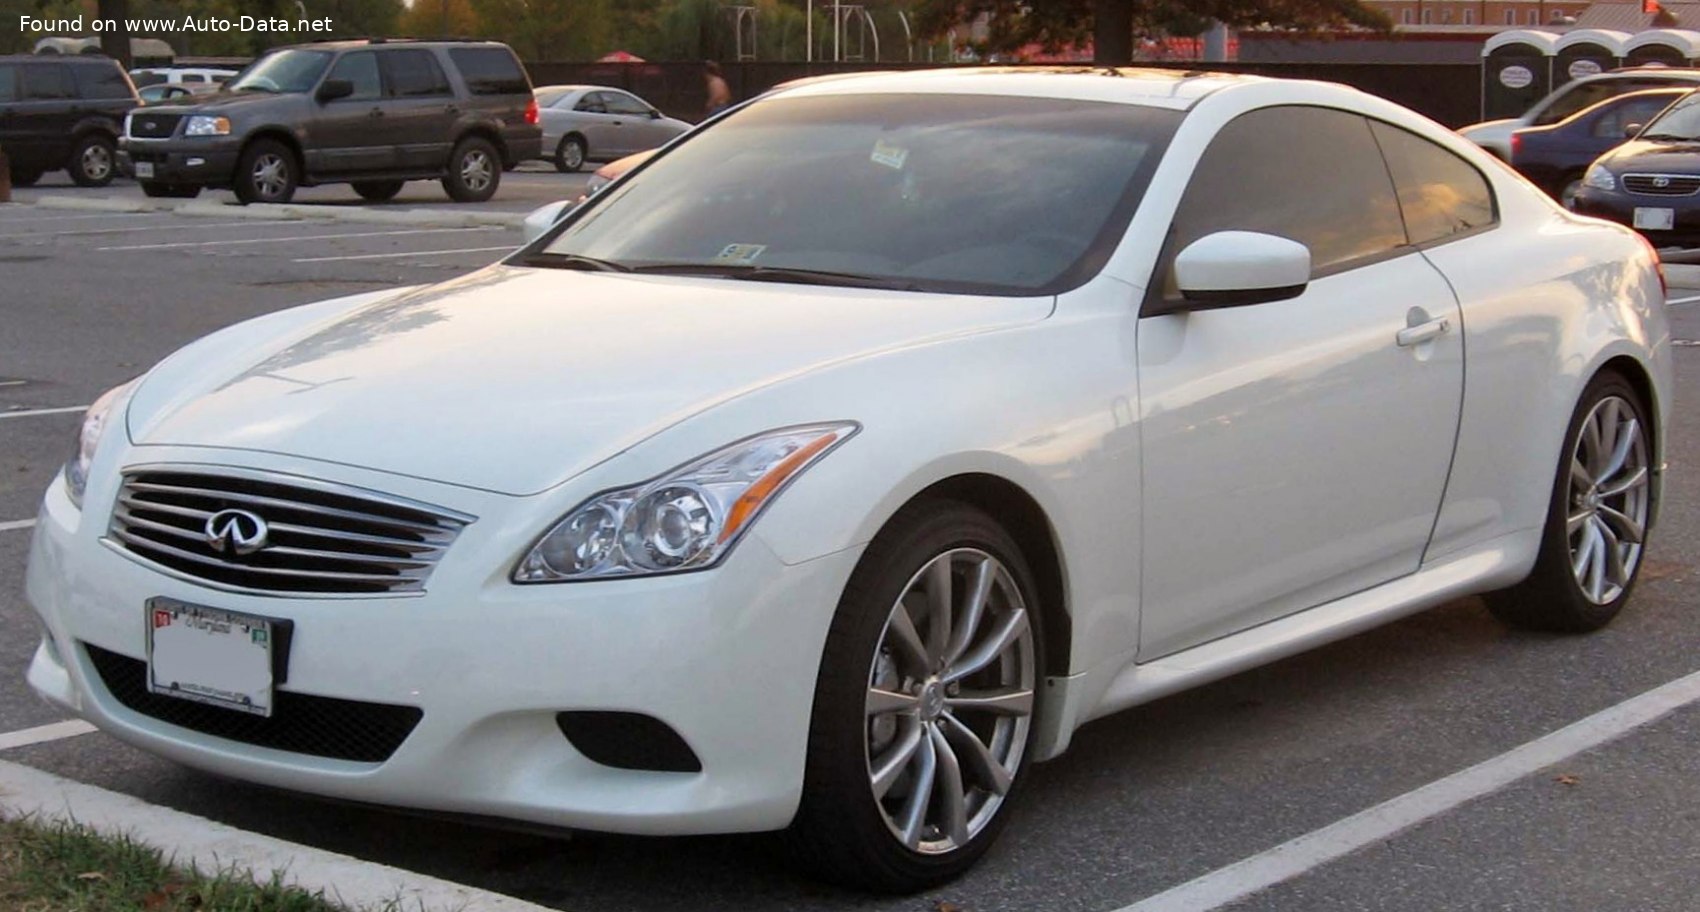 2008 Infiniti G37 Coupe 3.7I V6 (320 Hp) Automatic | Technical specs, data,  fuel consumption, Dimensions